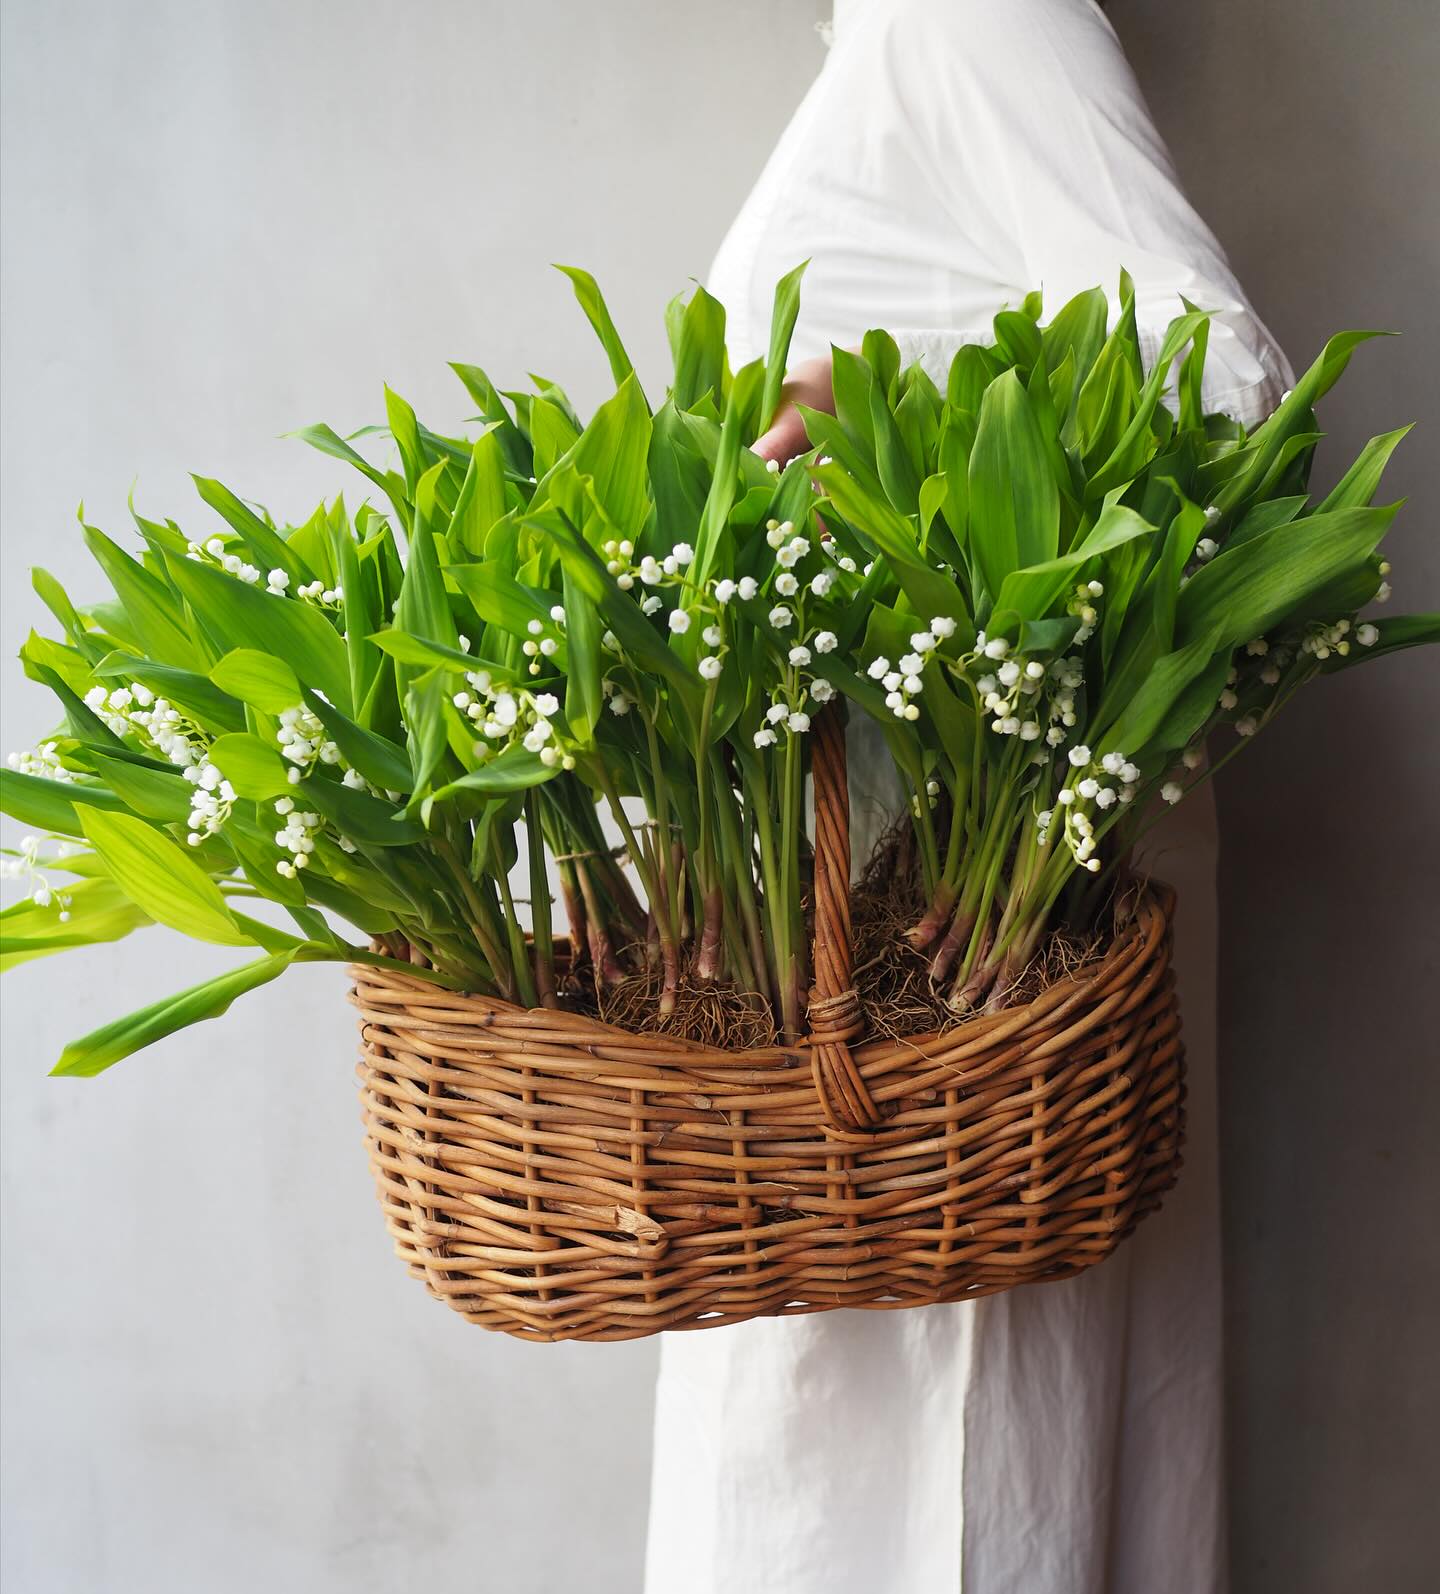 Lily of the Valley - Convallaria